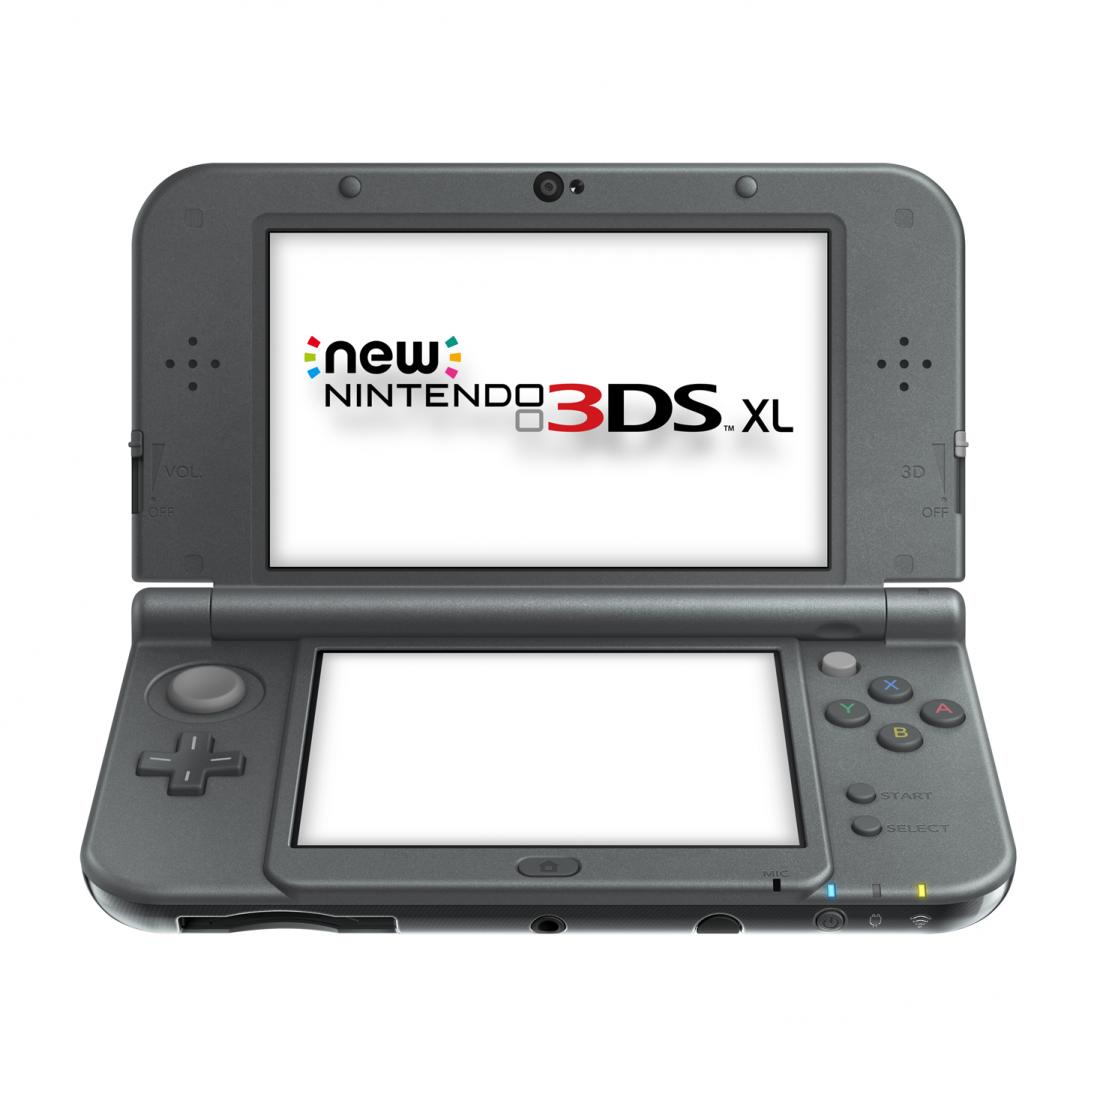 CFW for the new 3DS